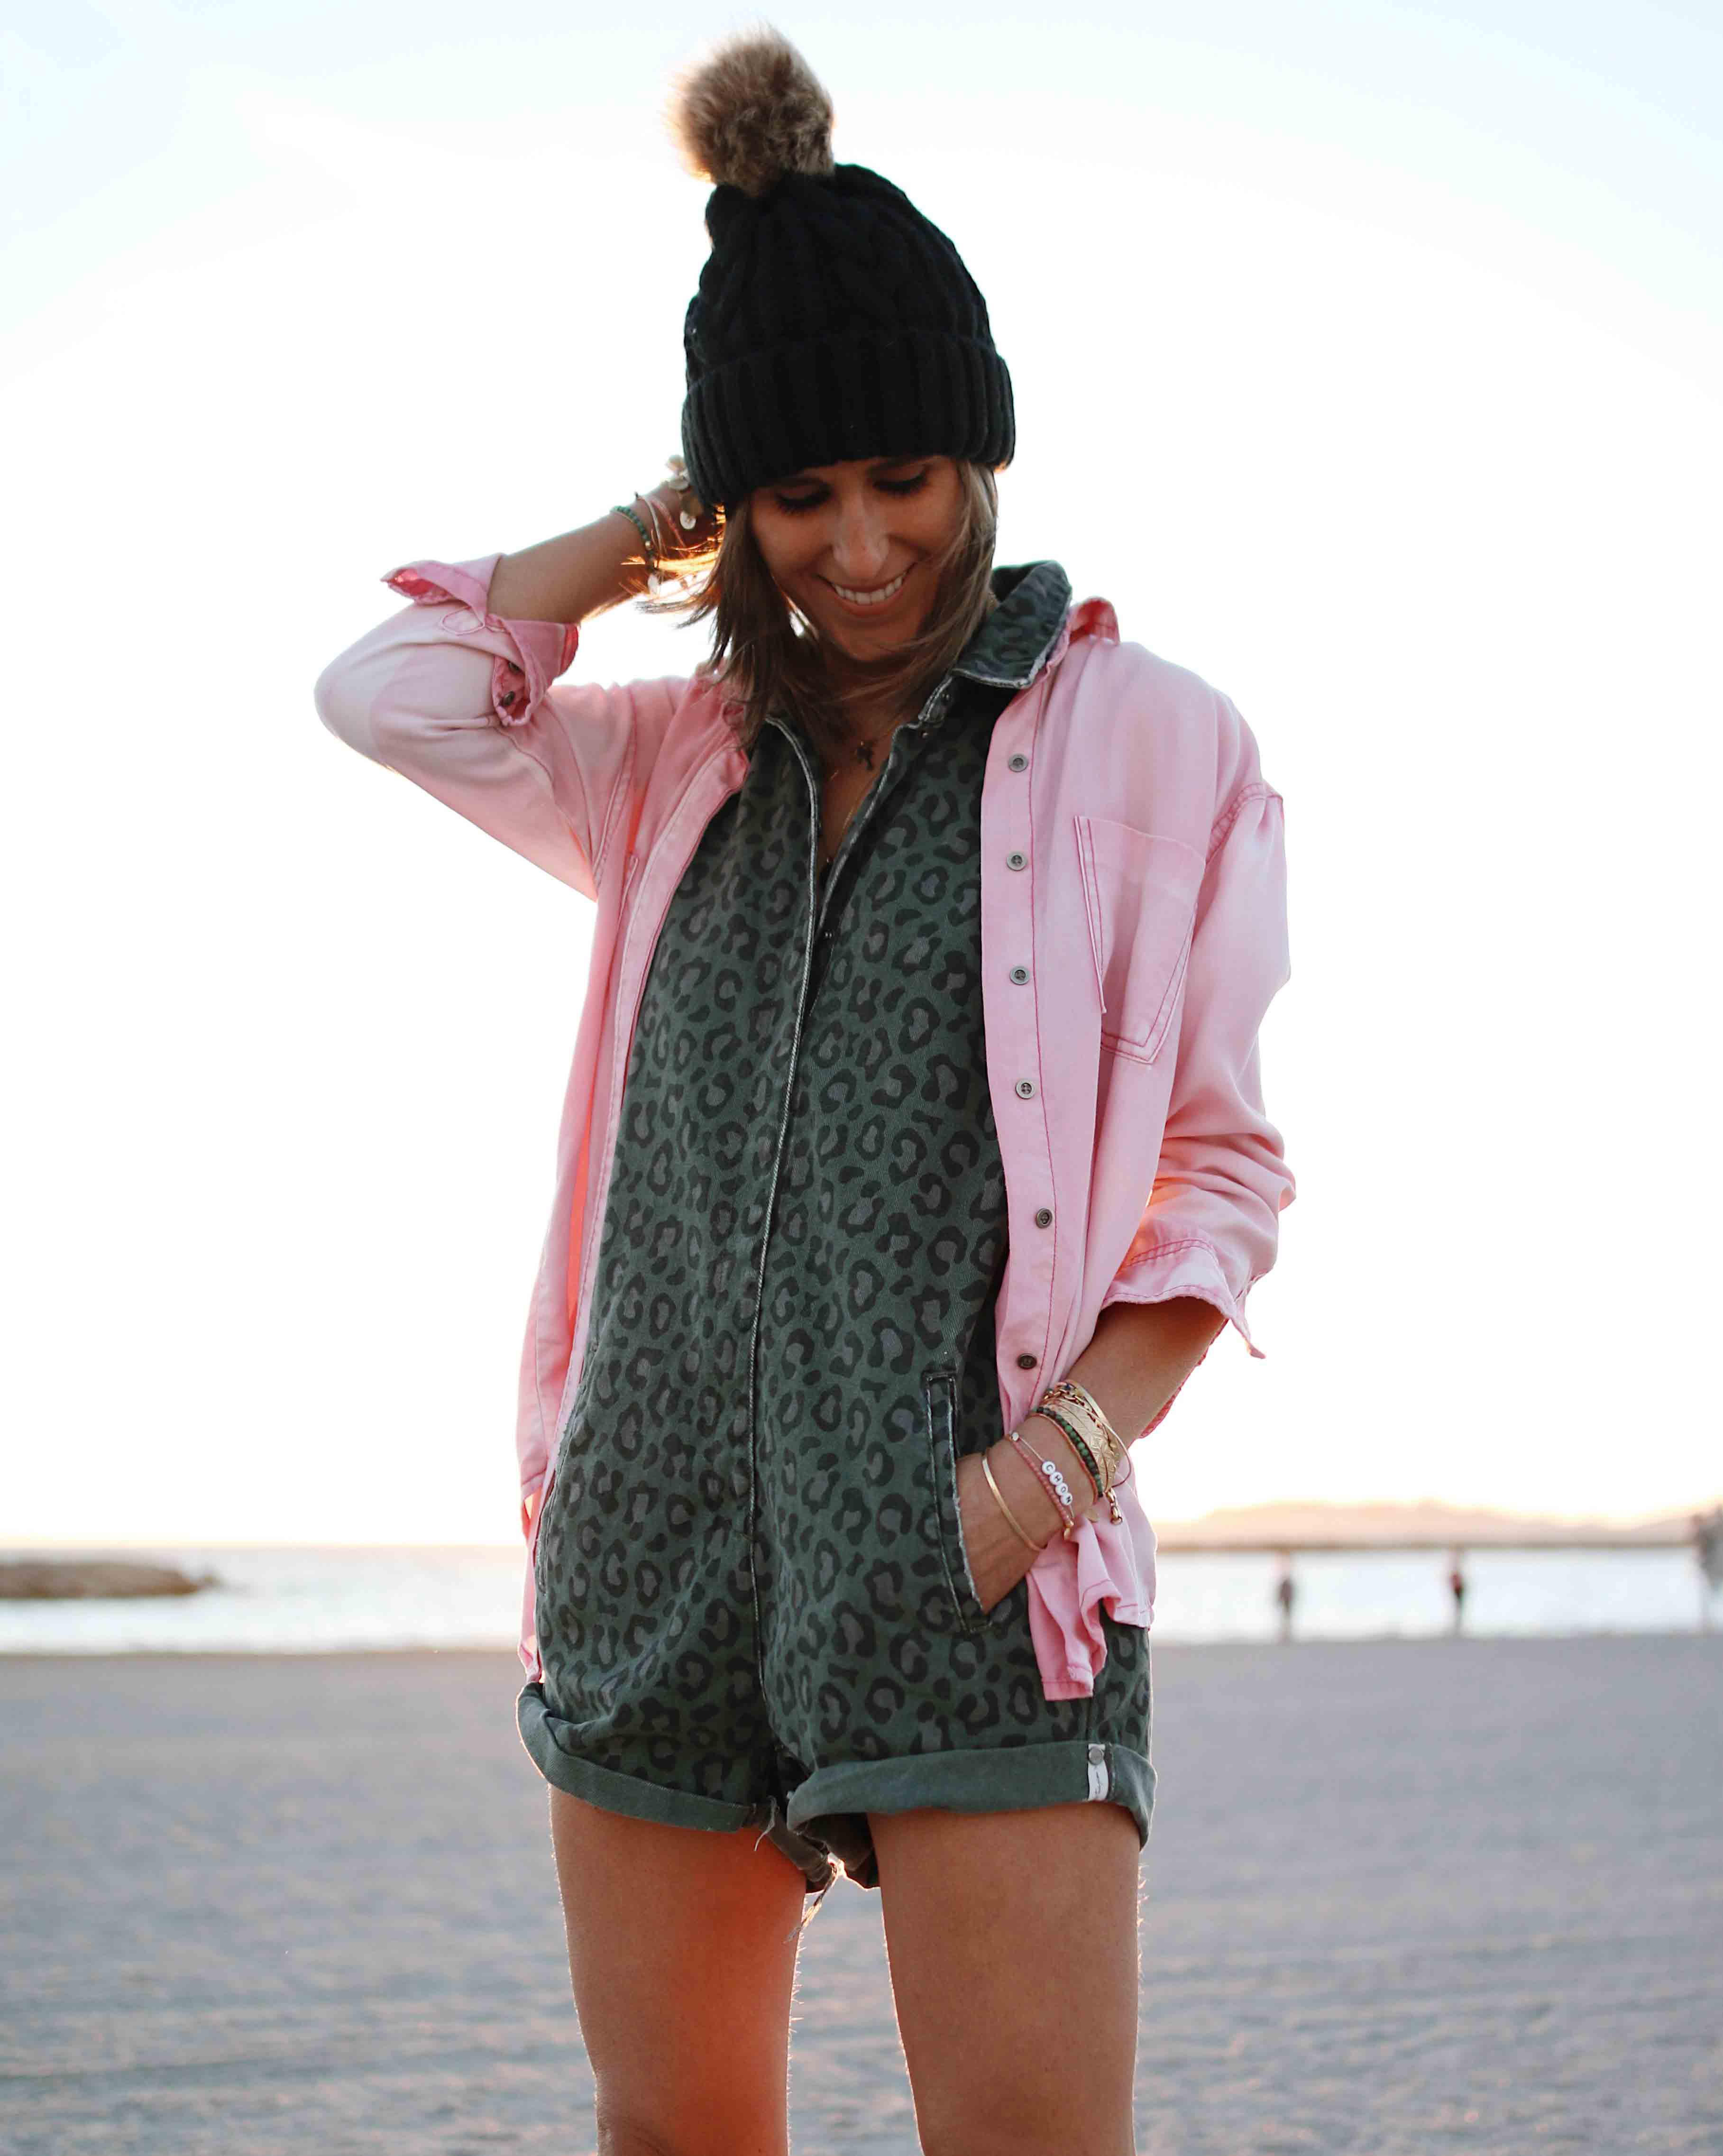 @chon.and.chon www.chonandchon.com jumpsuit one teaspoon, denim jumpsuit, pink jacket, one teaspoon outfit, casual style, casual look